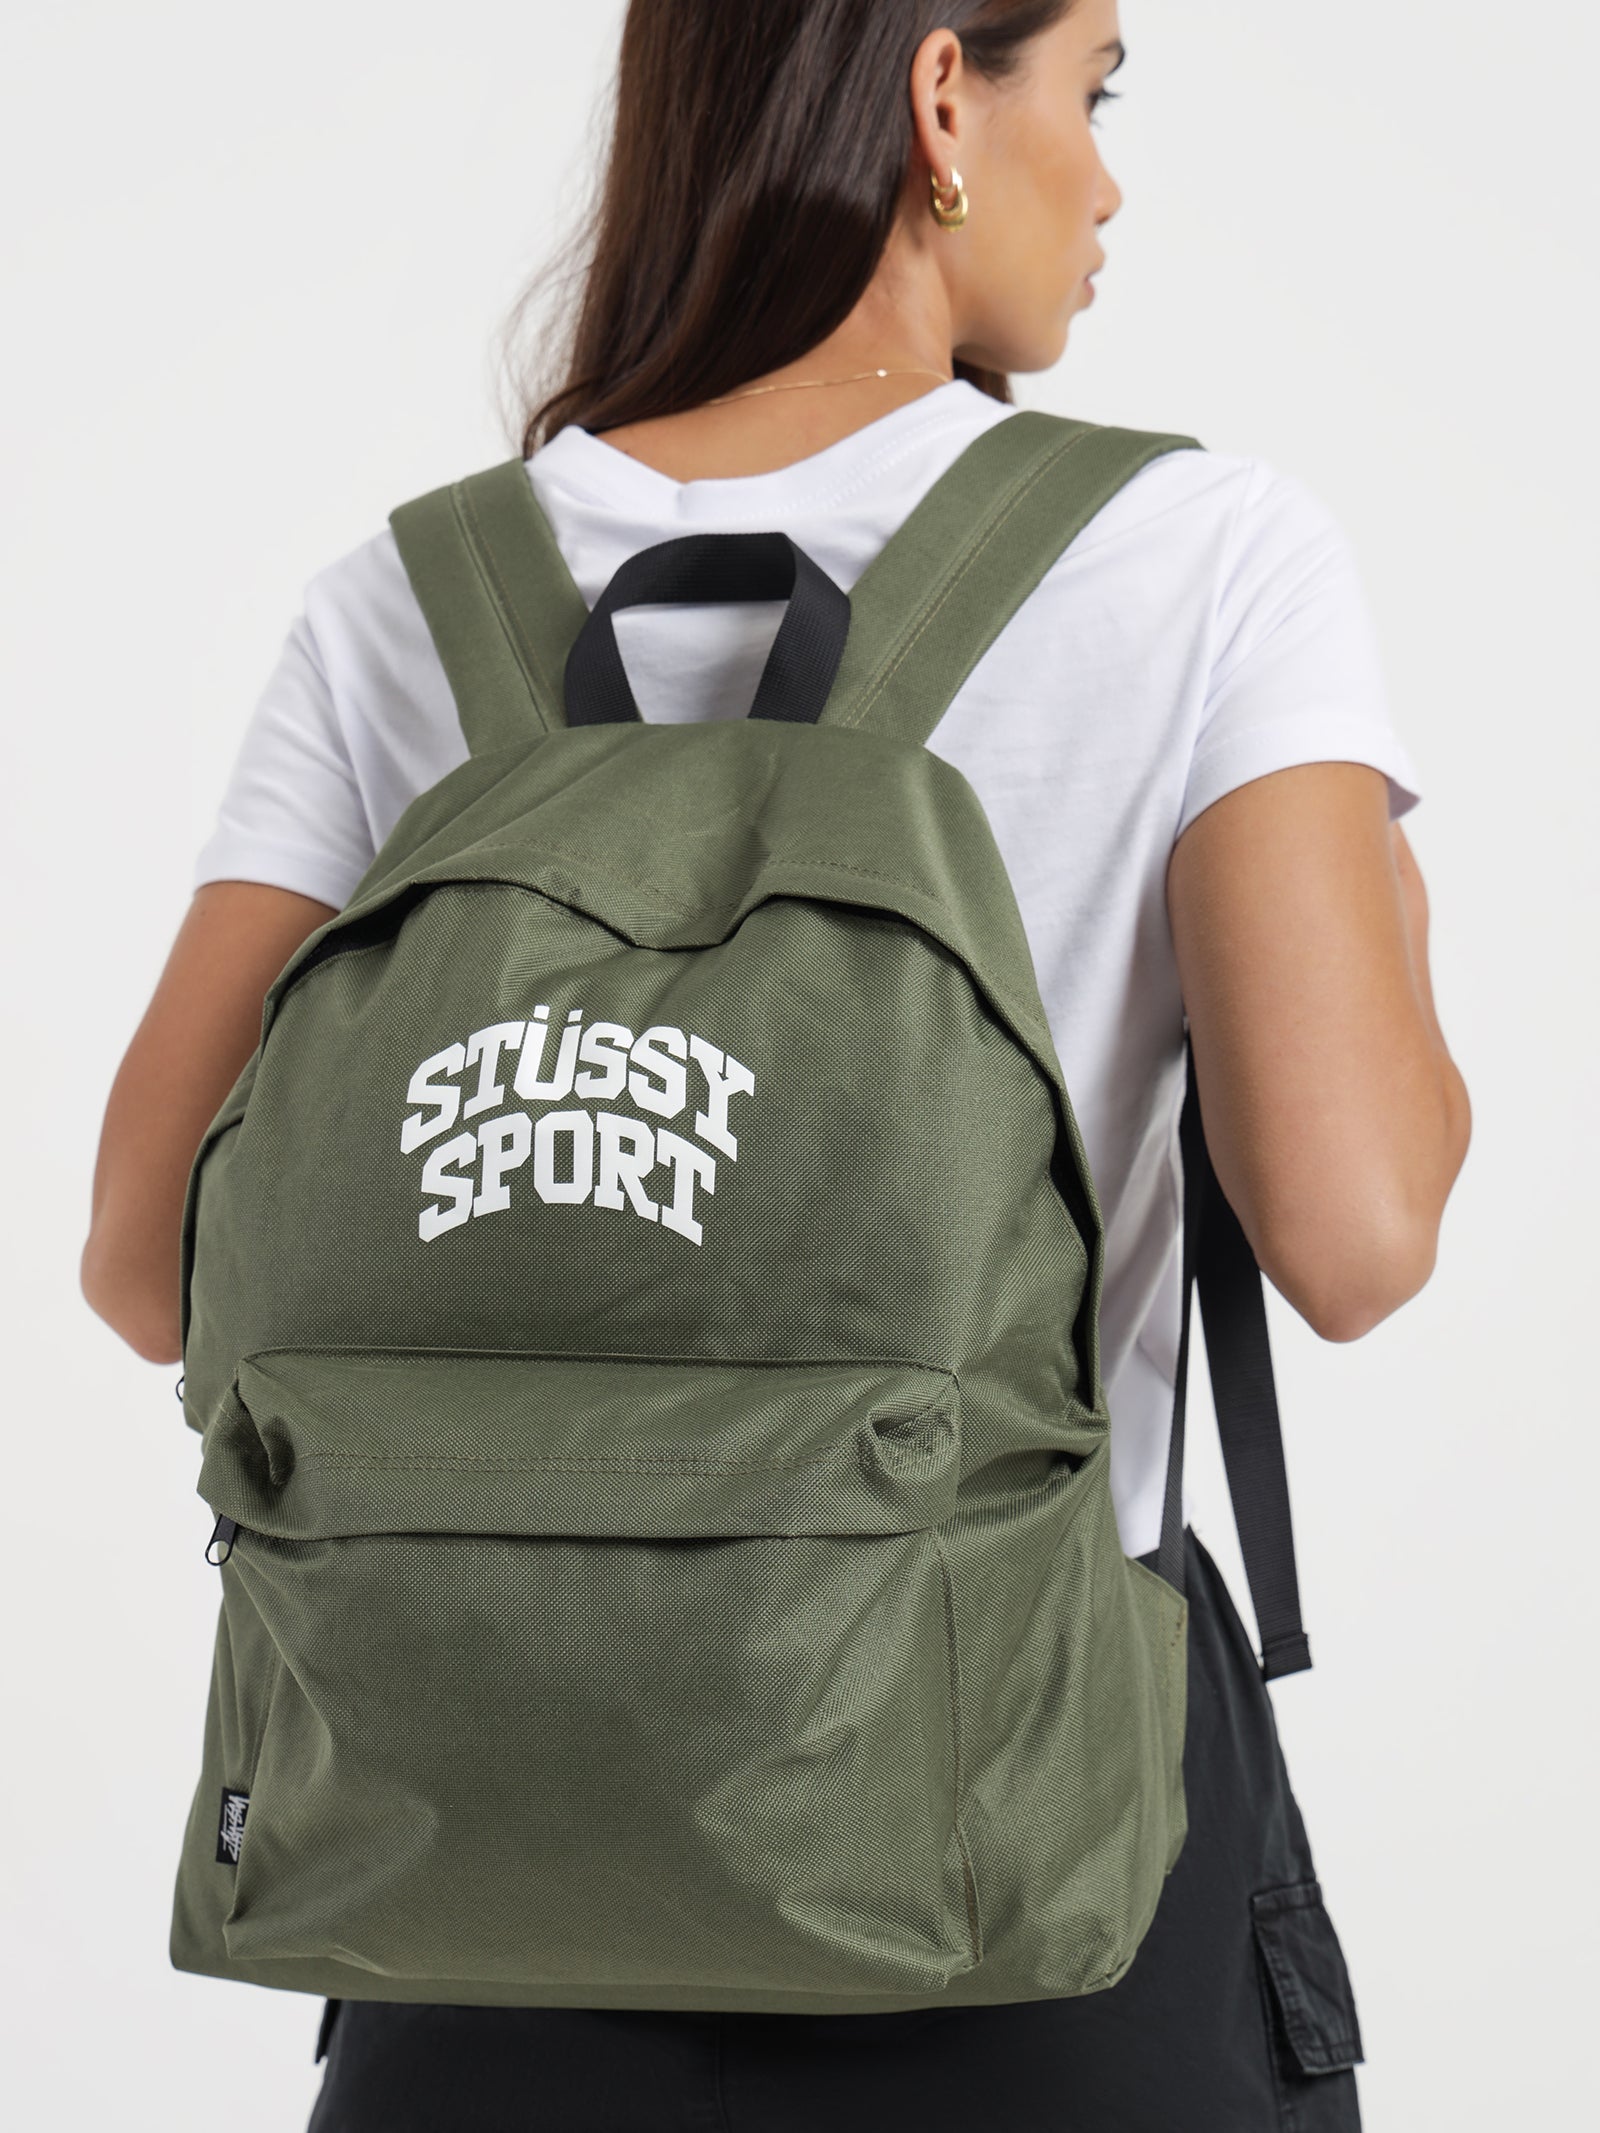 stussy ステューシー canvas backpack natural 【オンライン限定商品